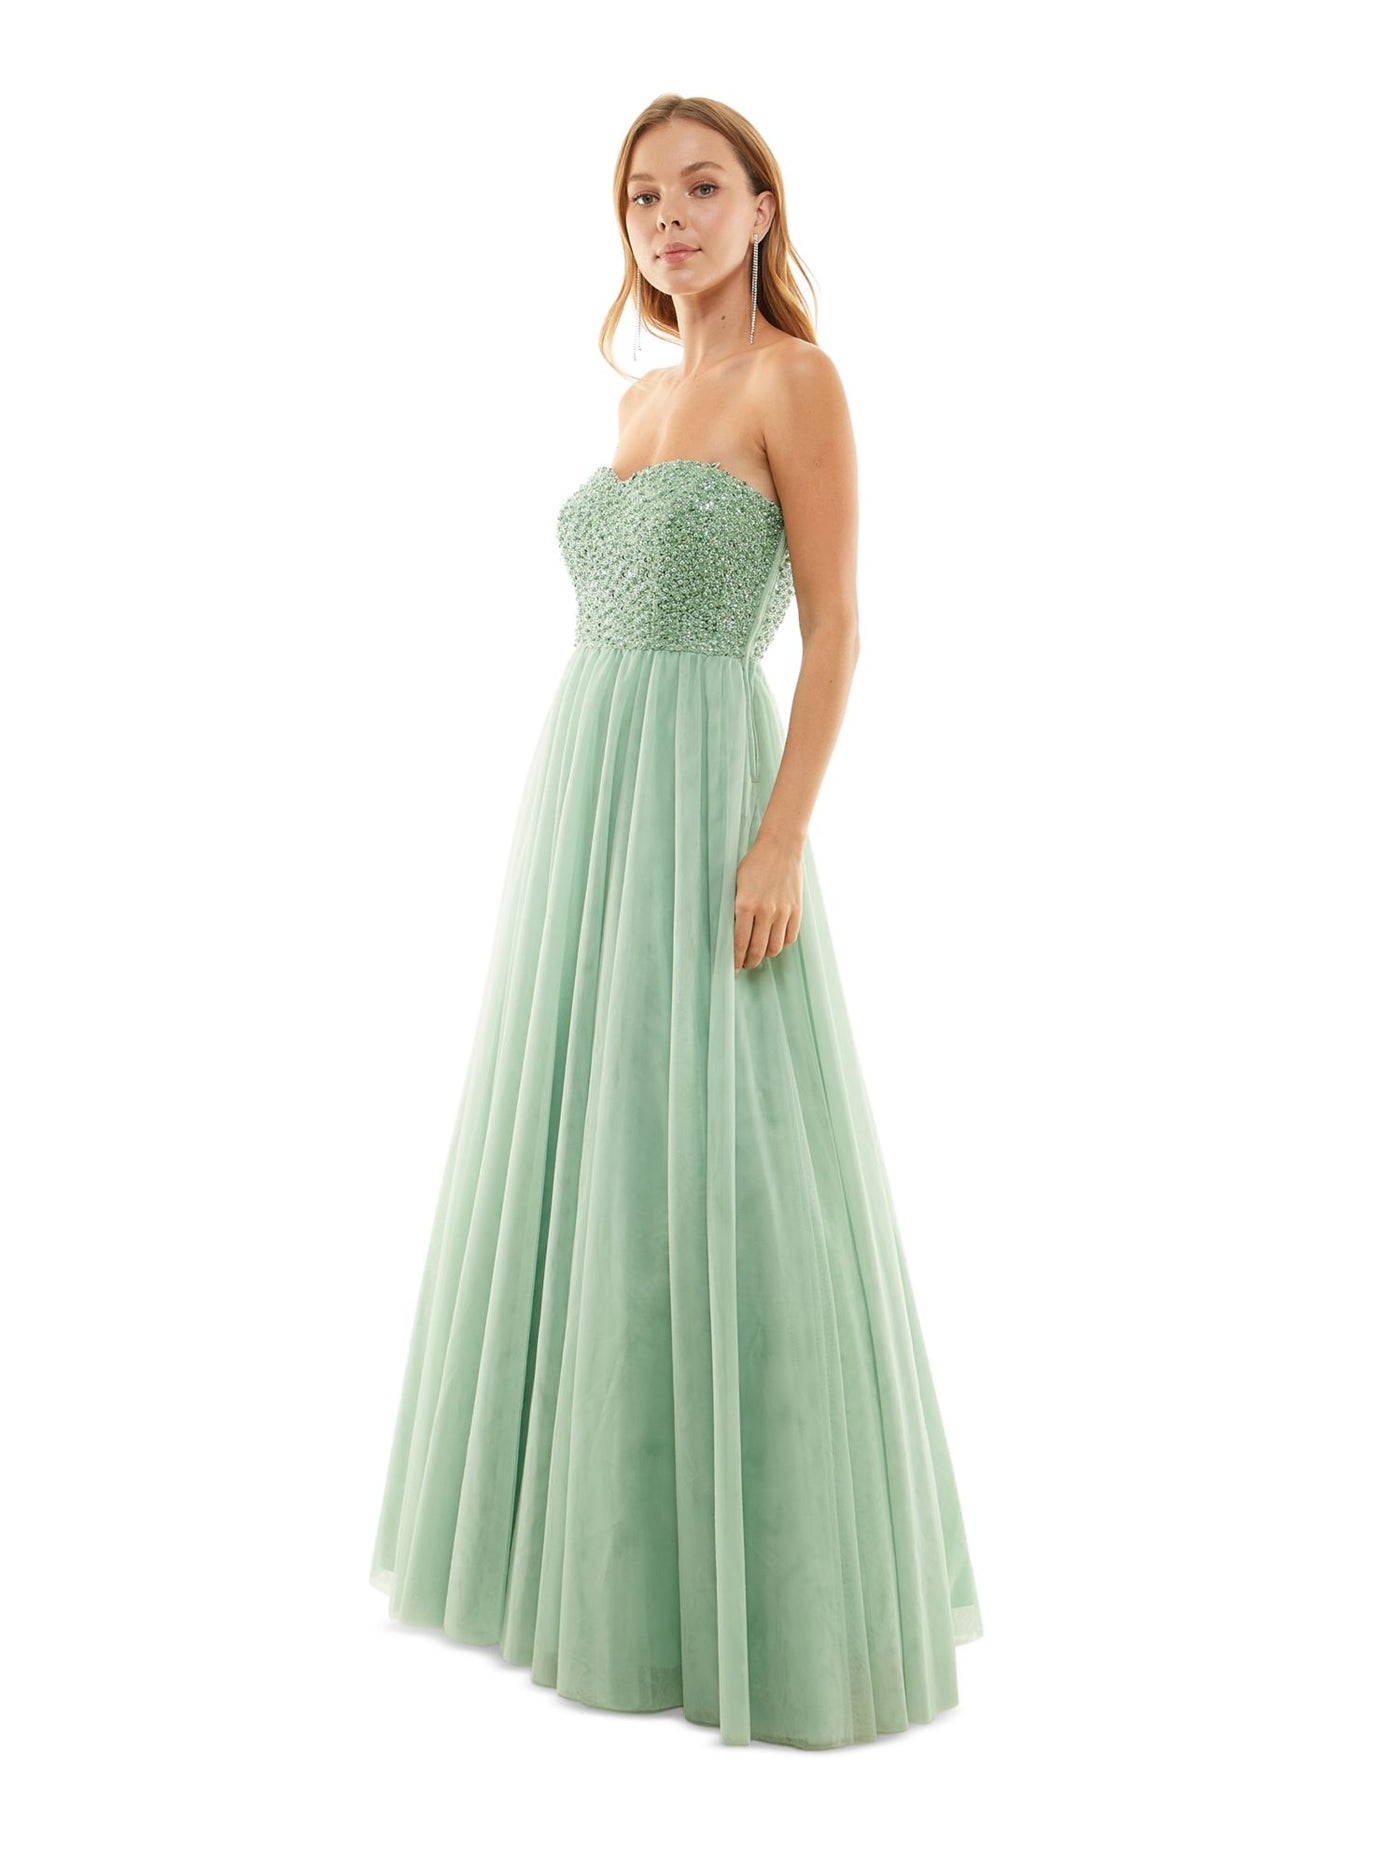 SAY YES TO THE PROM Womens Green Embellished Zippered Padded Lined Tulle Mesh Sleeveless Sweetheart Neckline Full-Length Party Gown Dress 1